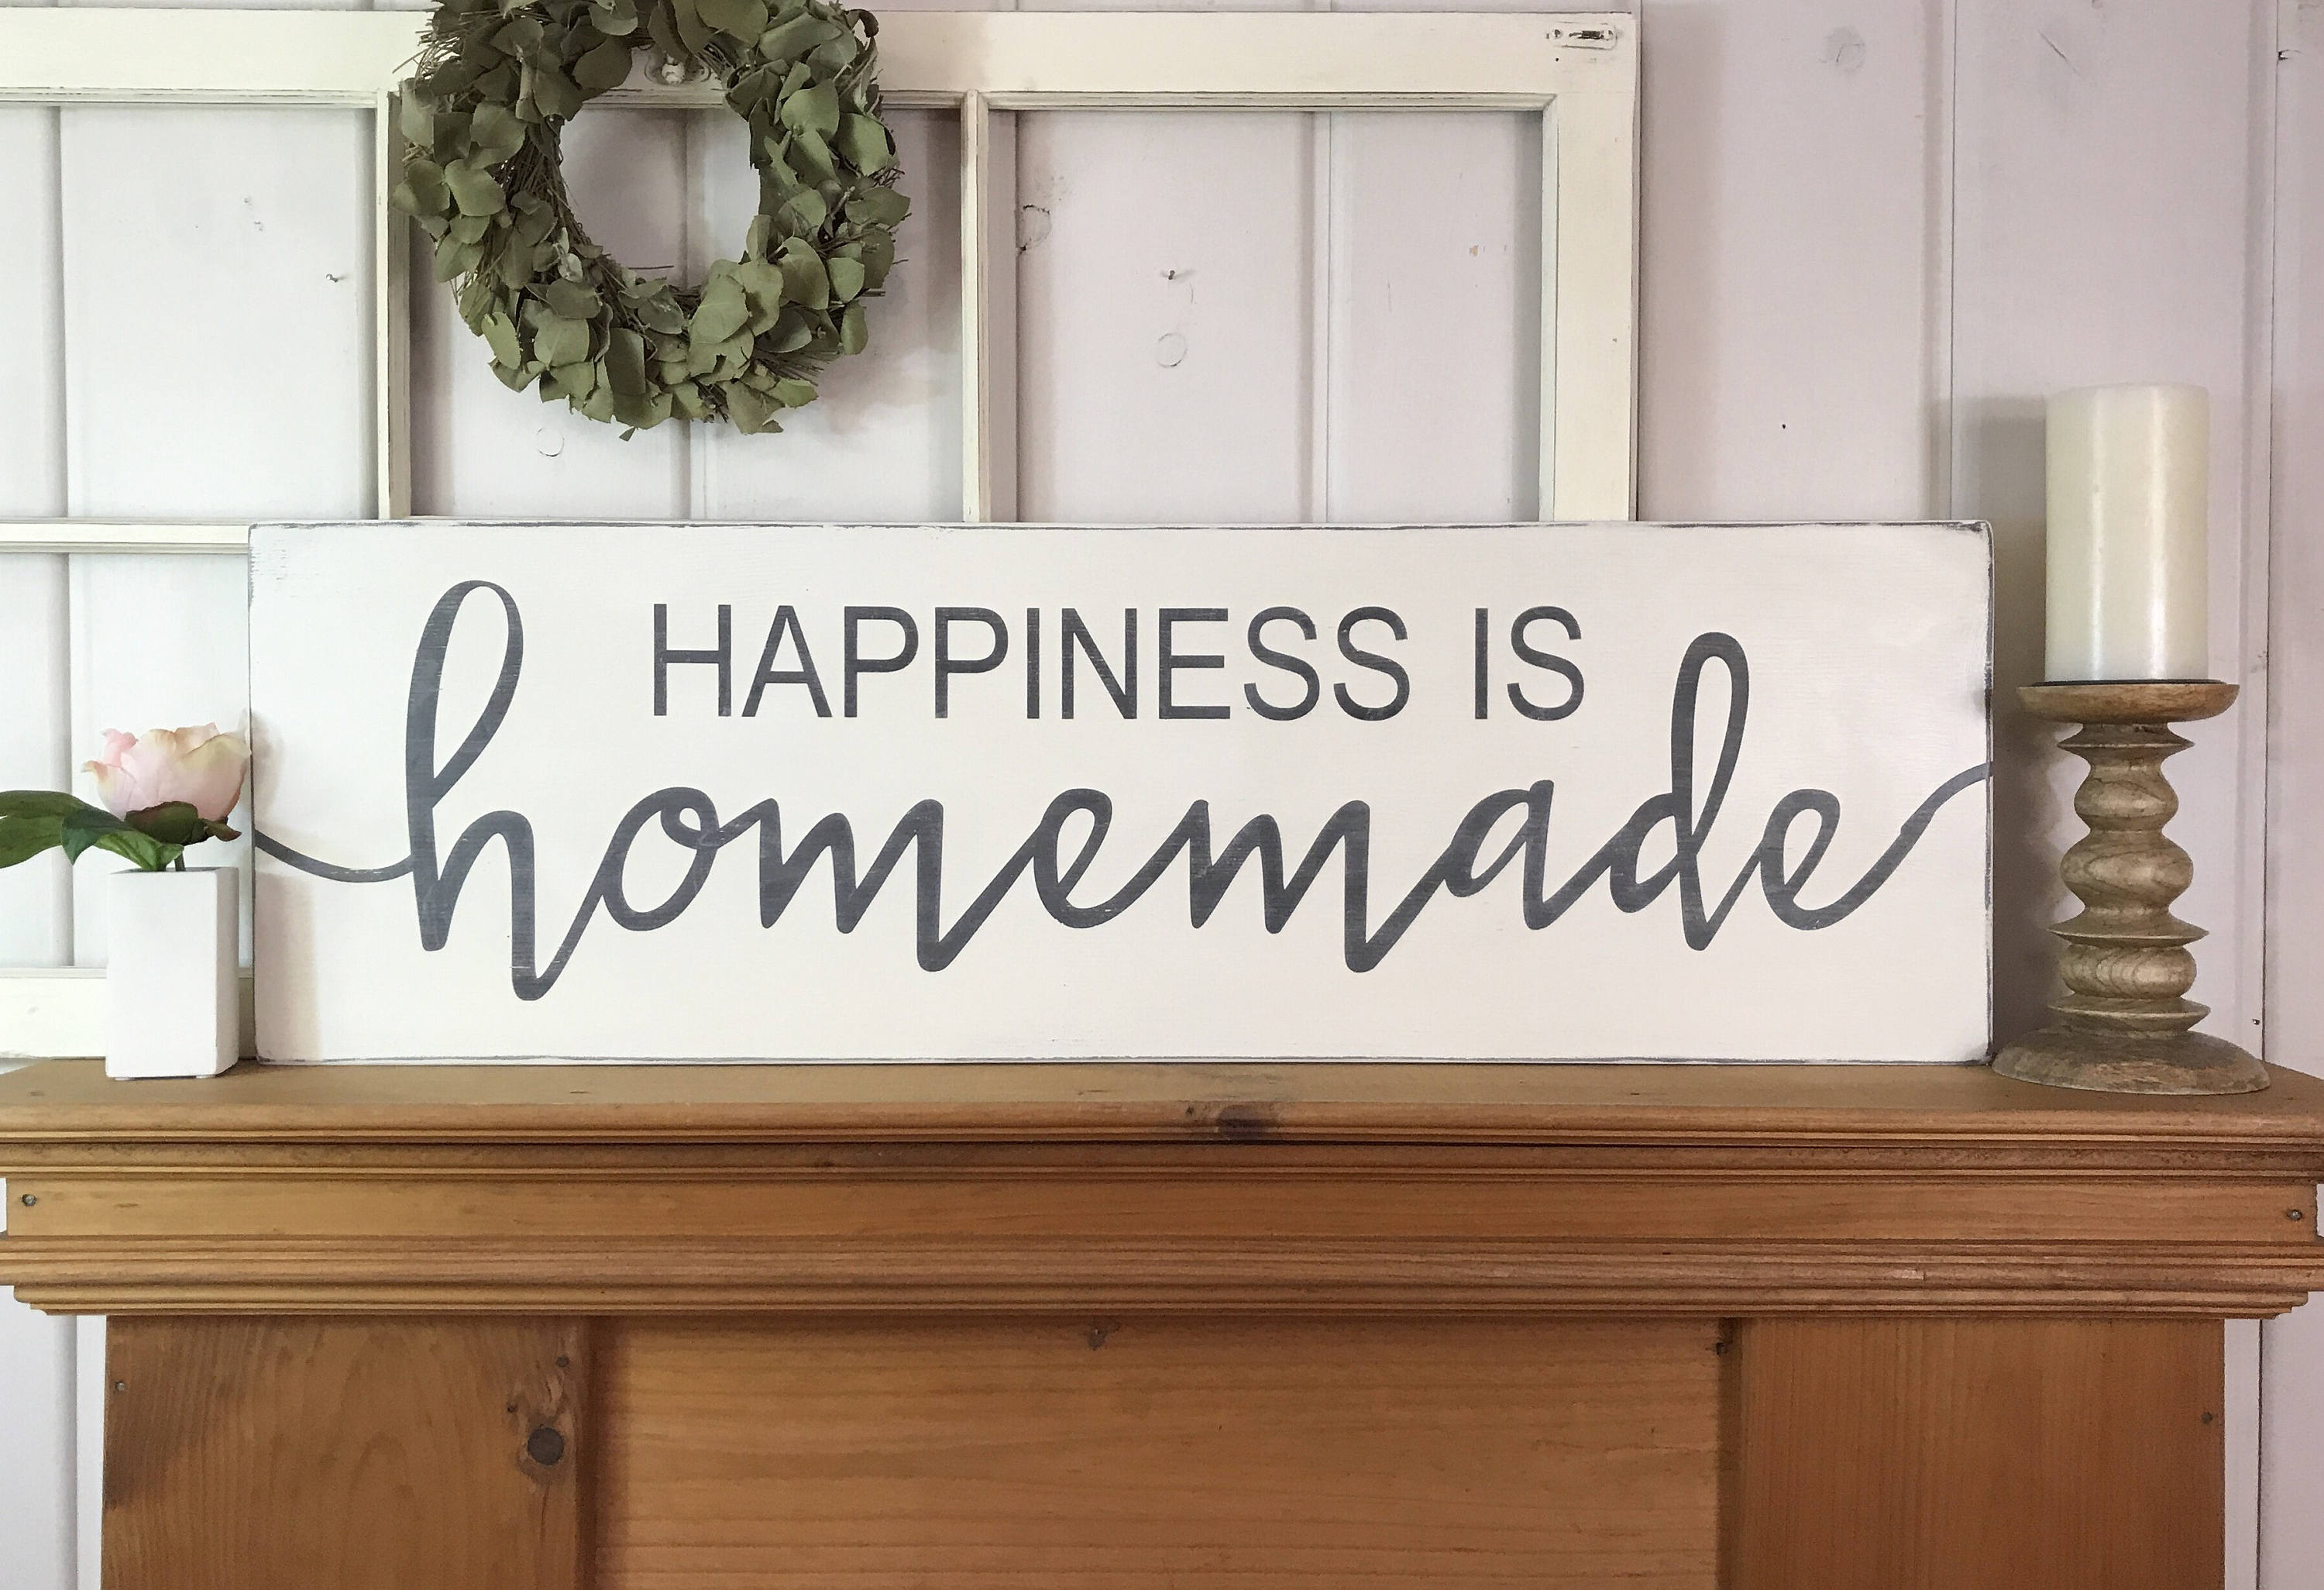 Happiness is homemade kitchen wall decor rustic wood sign